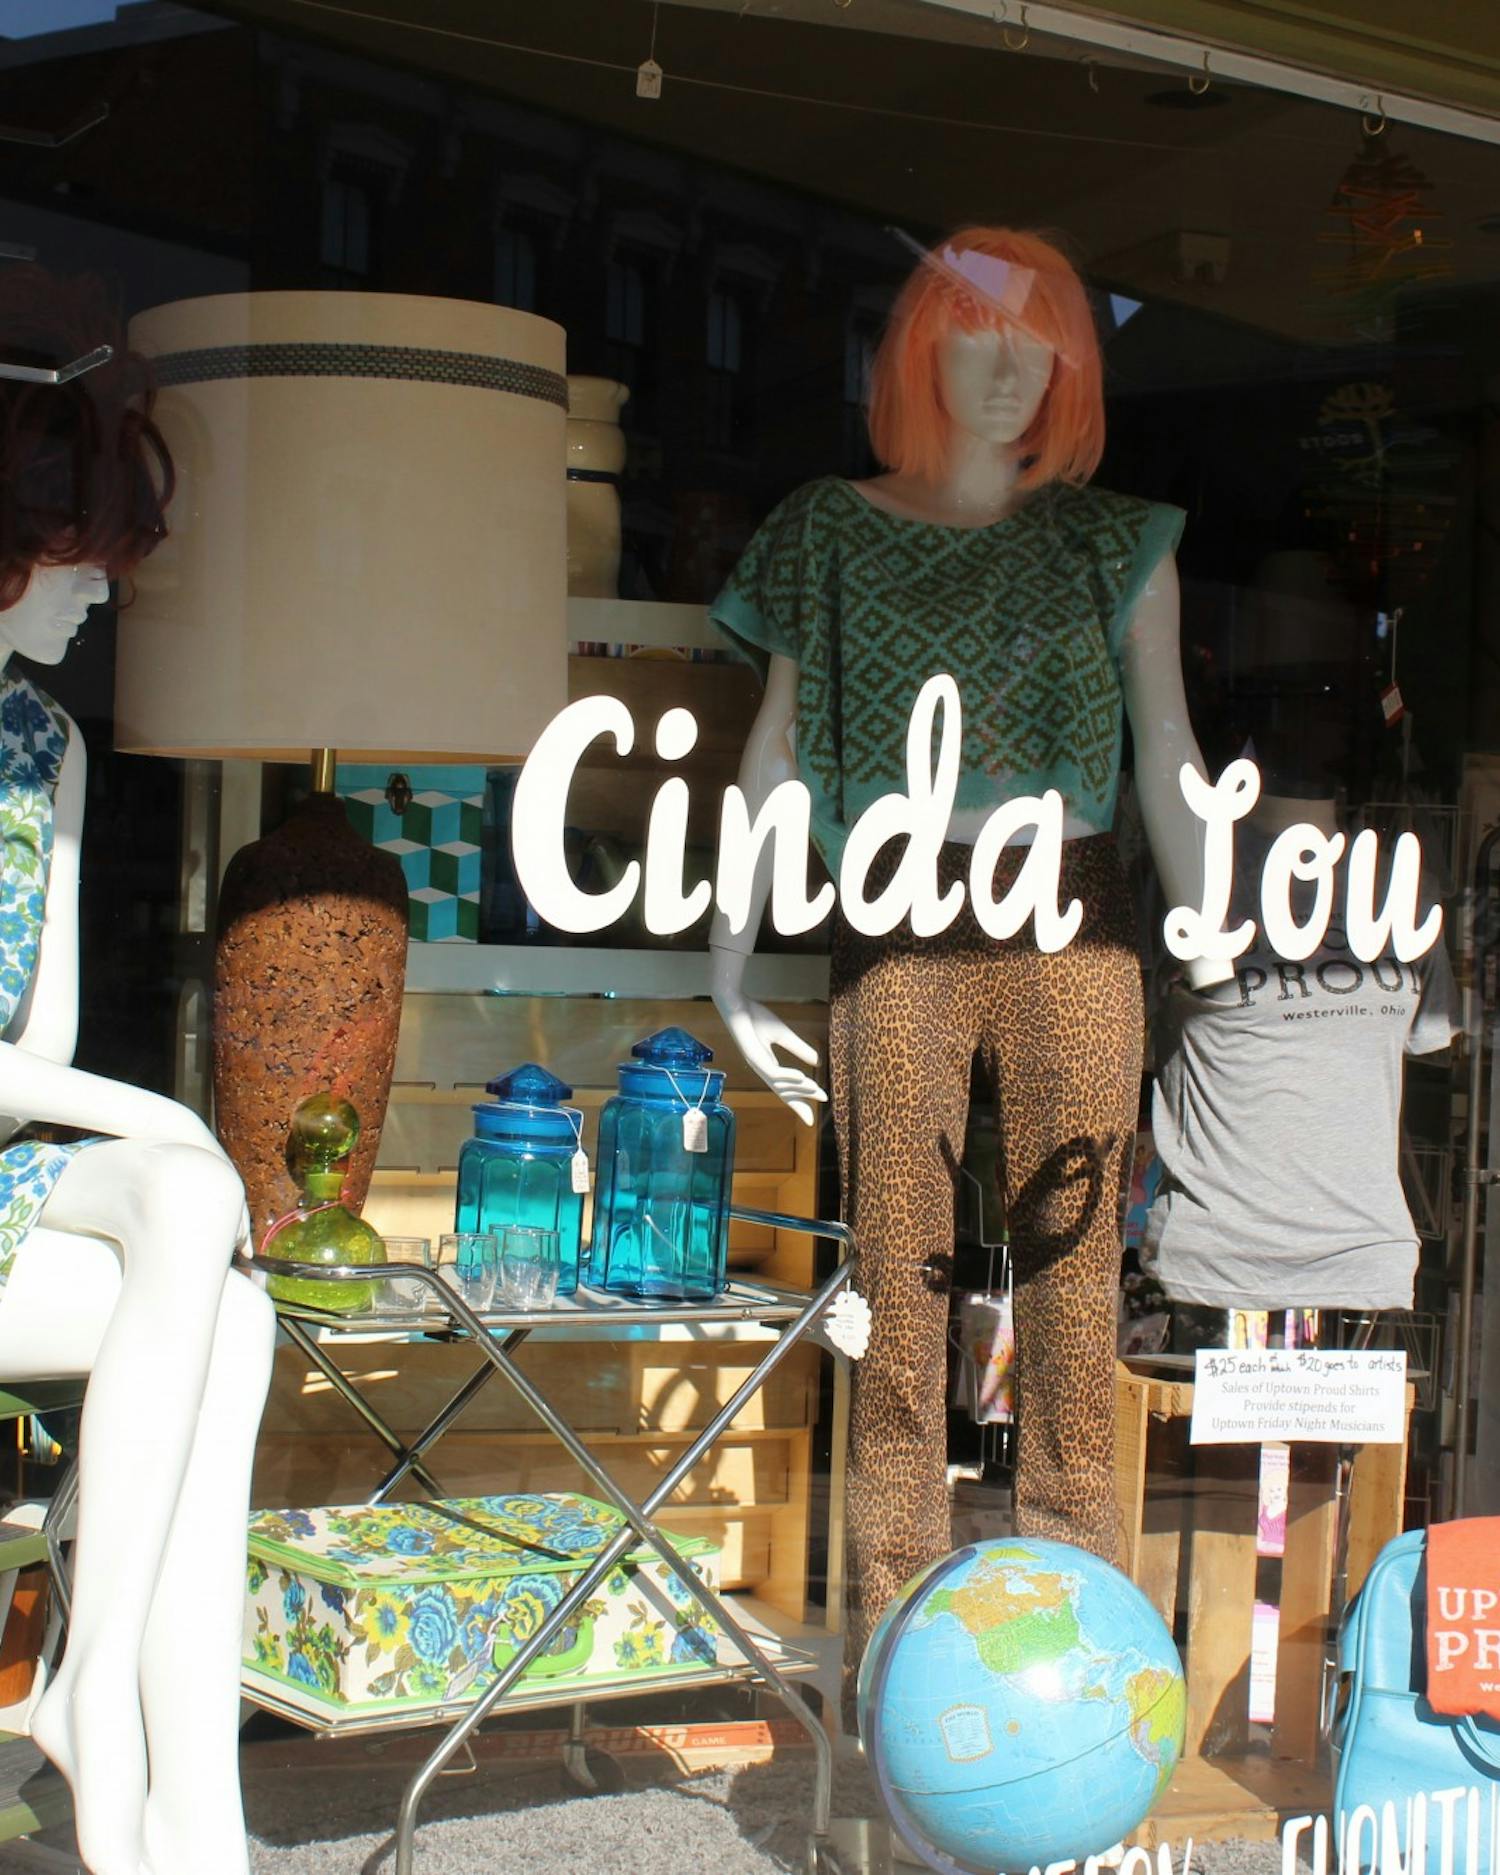 A Gal Named Cinda Lou sells vintage items in Westerville, OH